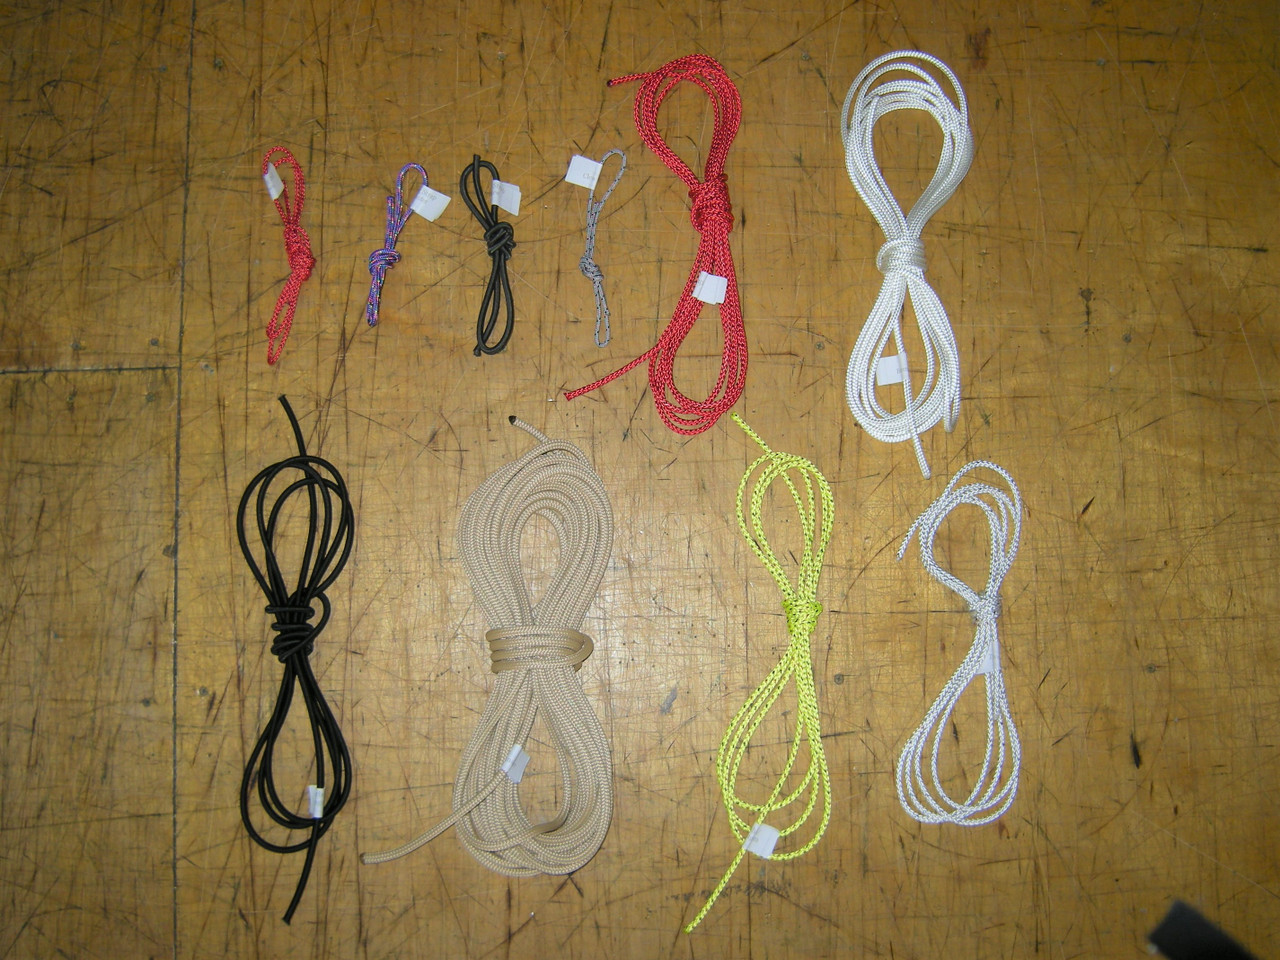 Line kit for a Laser assembled by SLO Sail and Canvas from high quality Marlow, Samson, and/or Bainbridge ropes. 